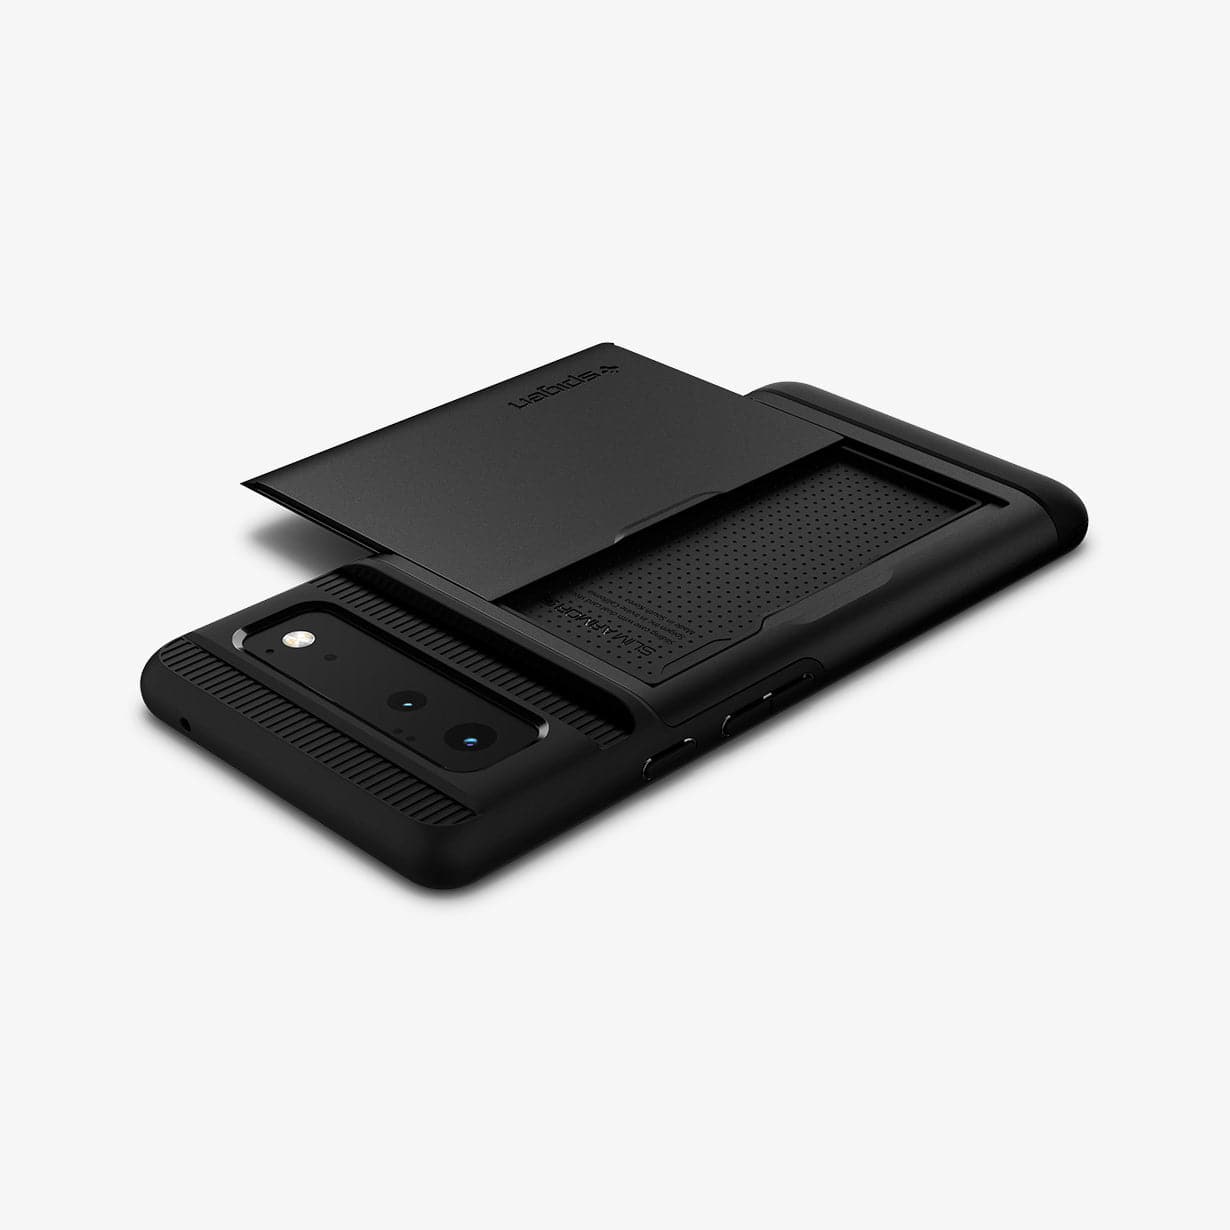 ACS03440 - Pixel 6 Case Slim Armor CS in black showing the top, side and back with card slot open and empty